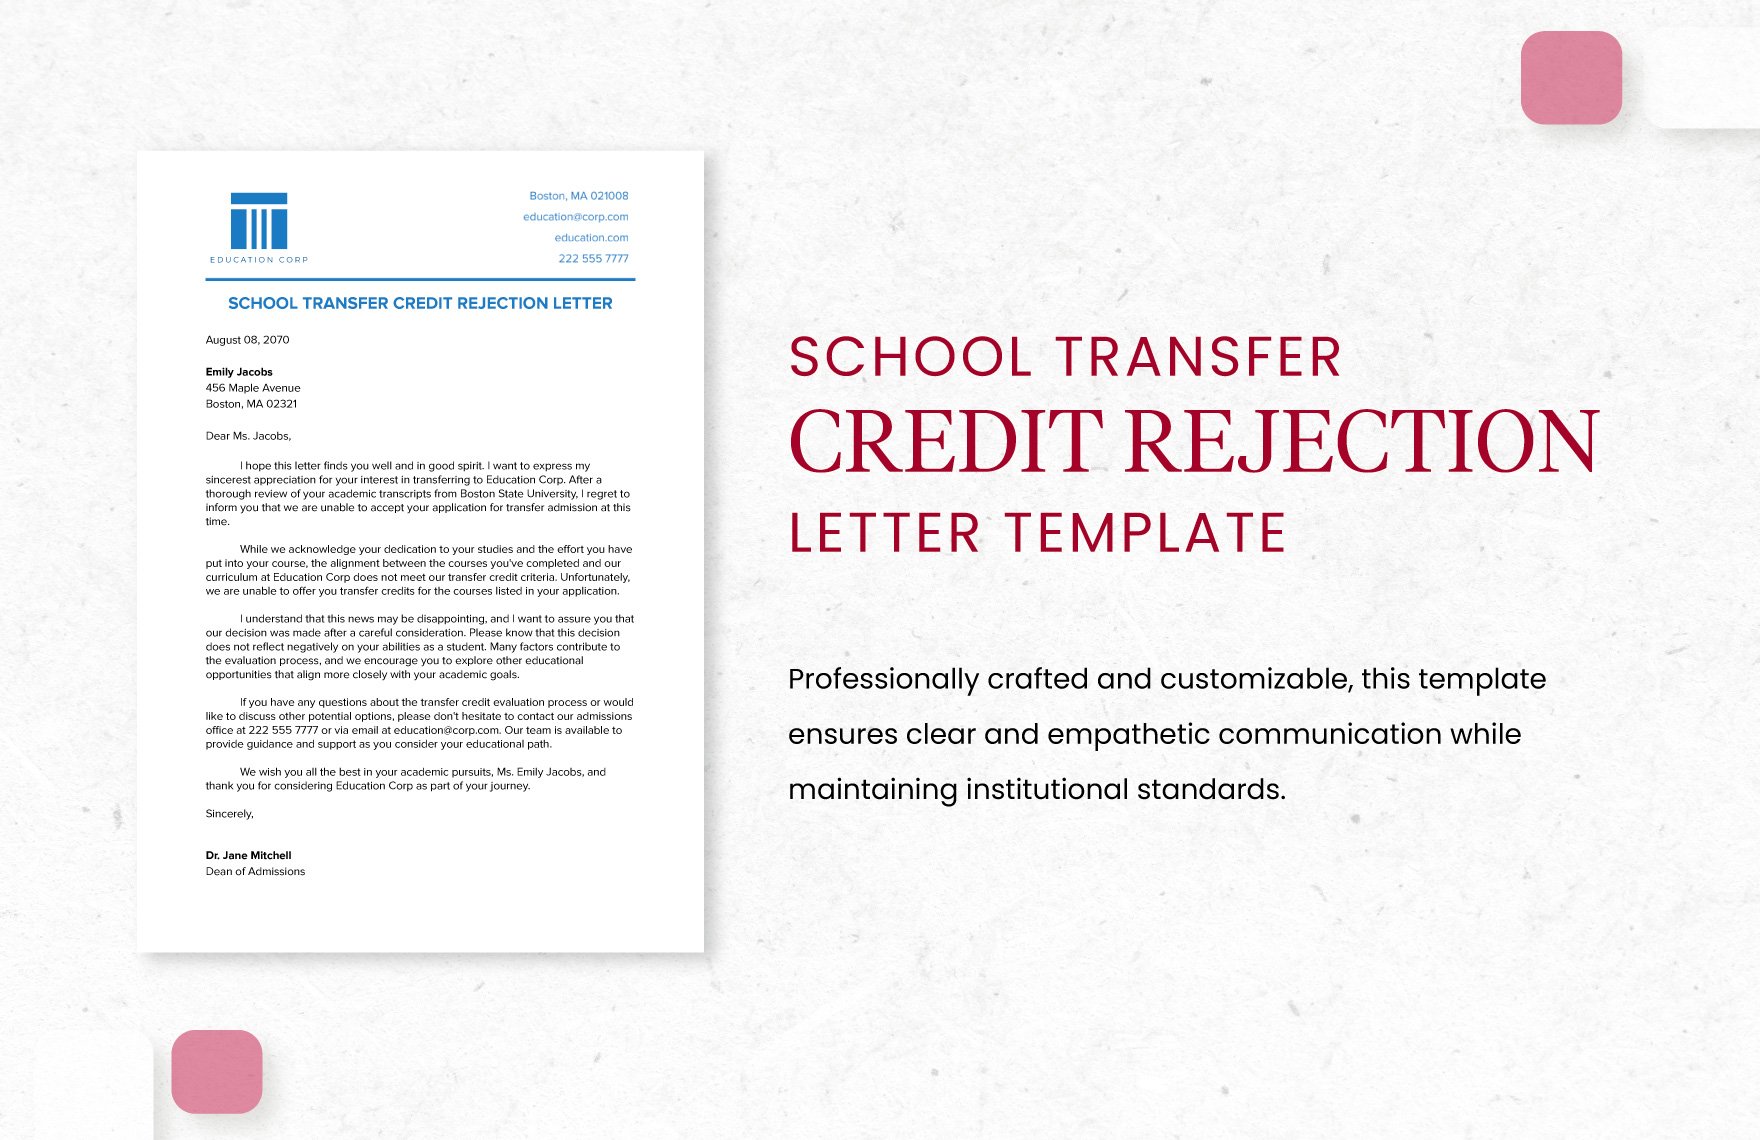 School Transfer Credit Rejection Letter Template in Word, Google Docs, PDF